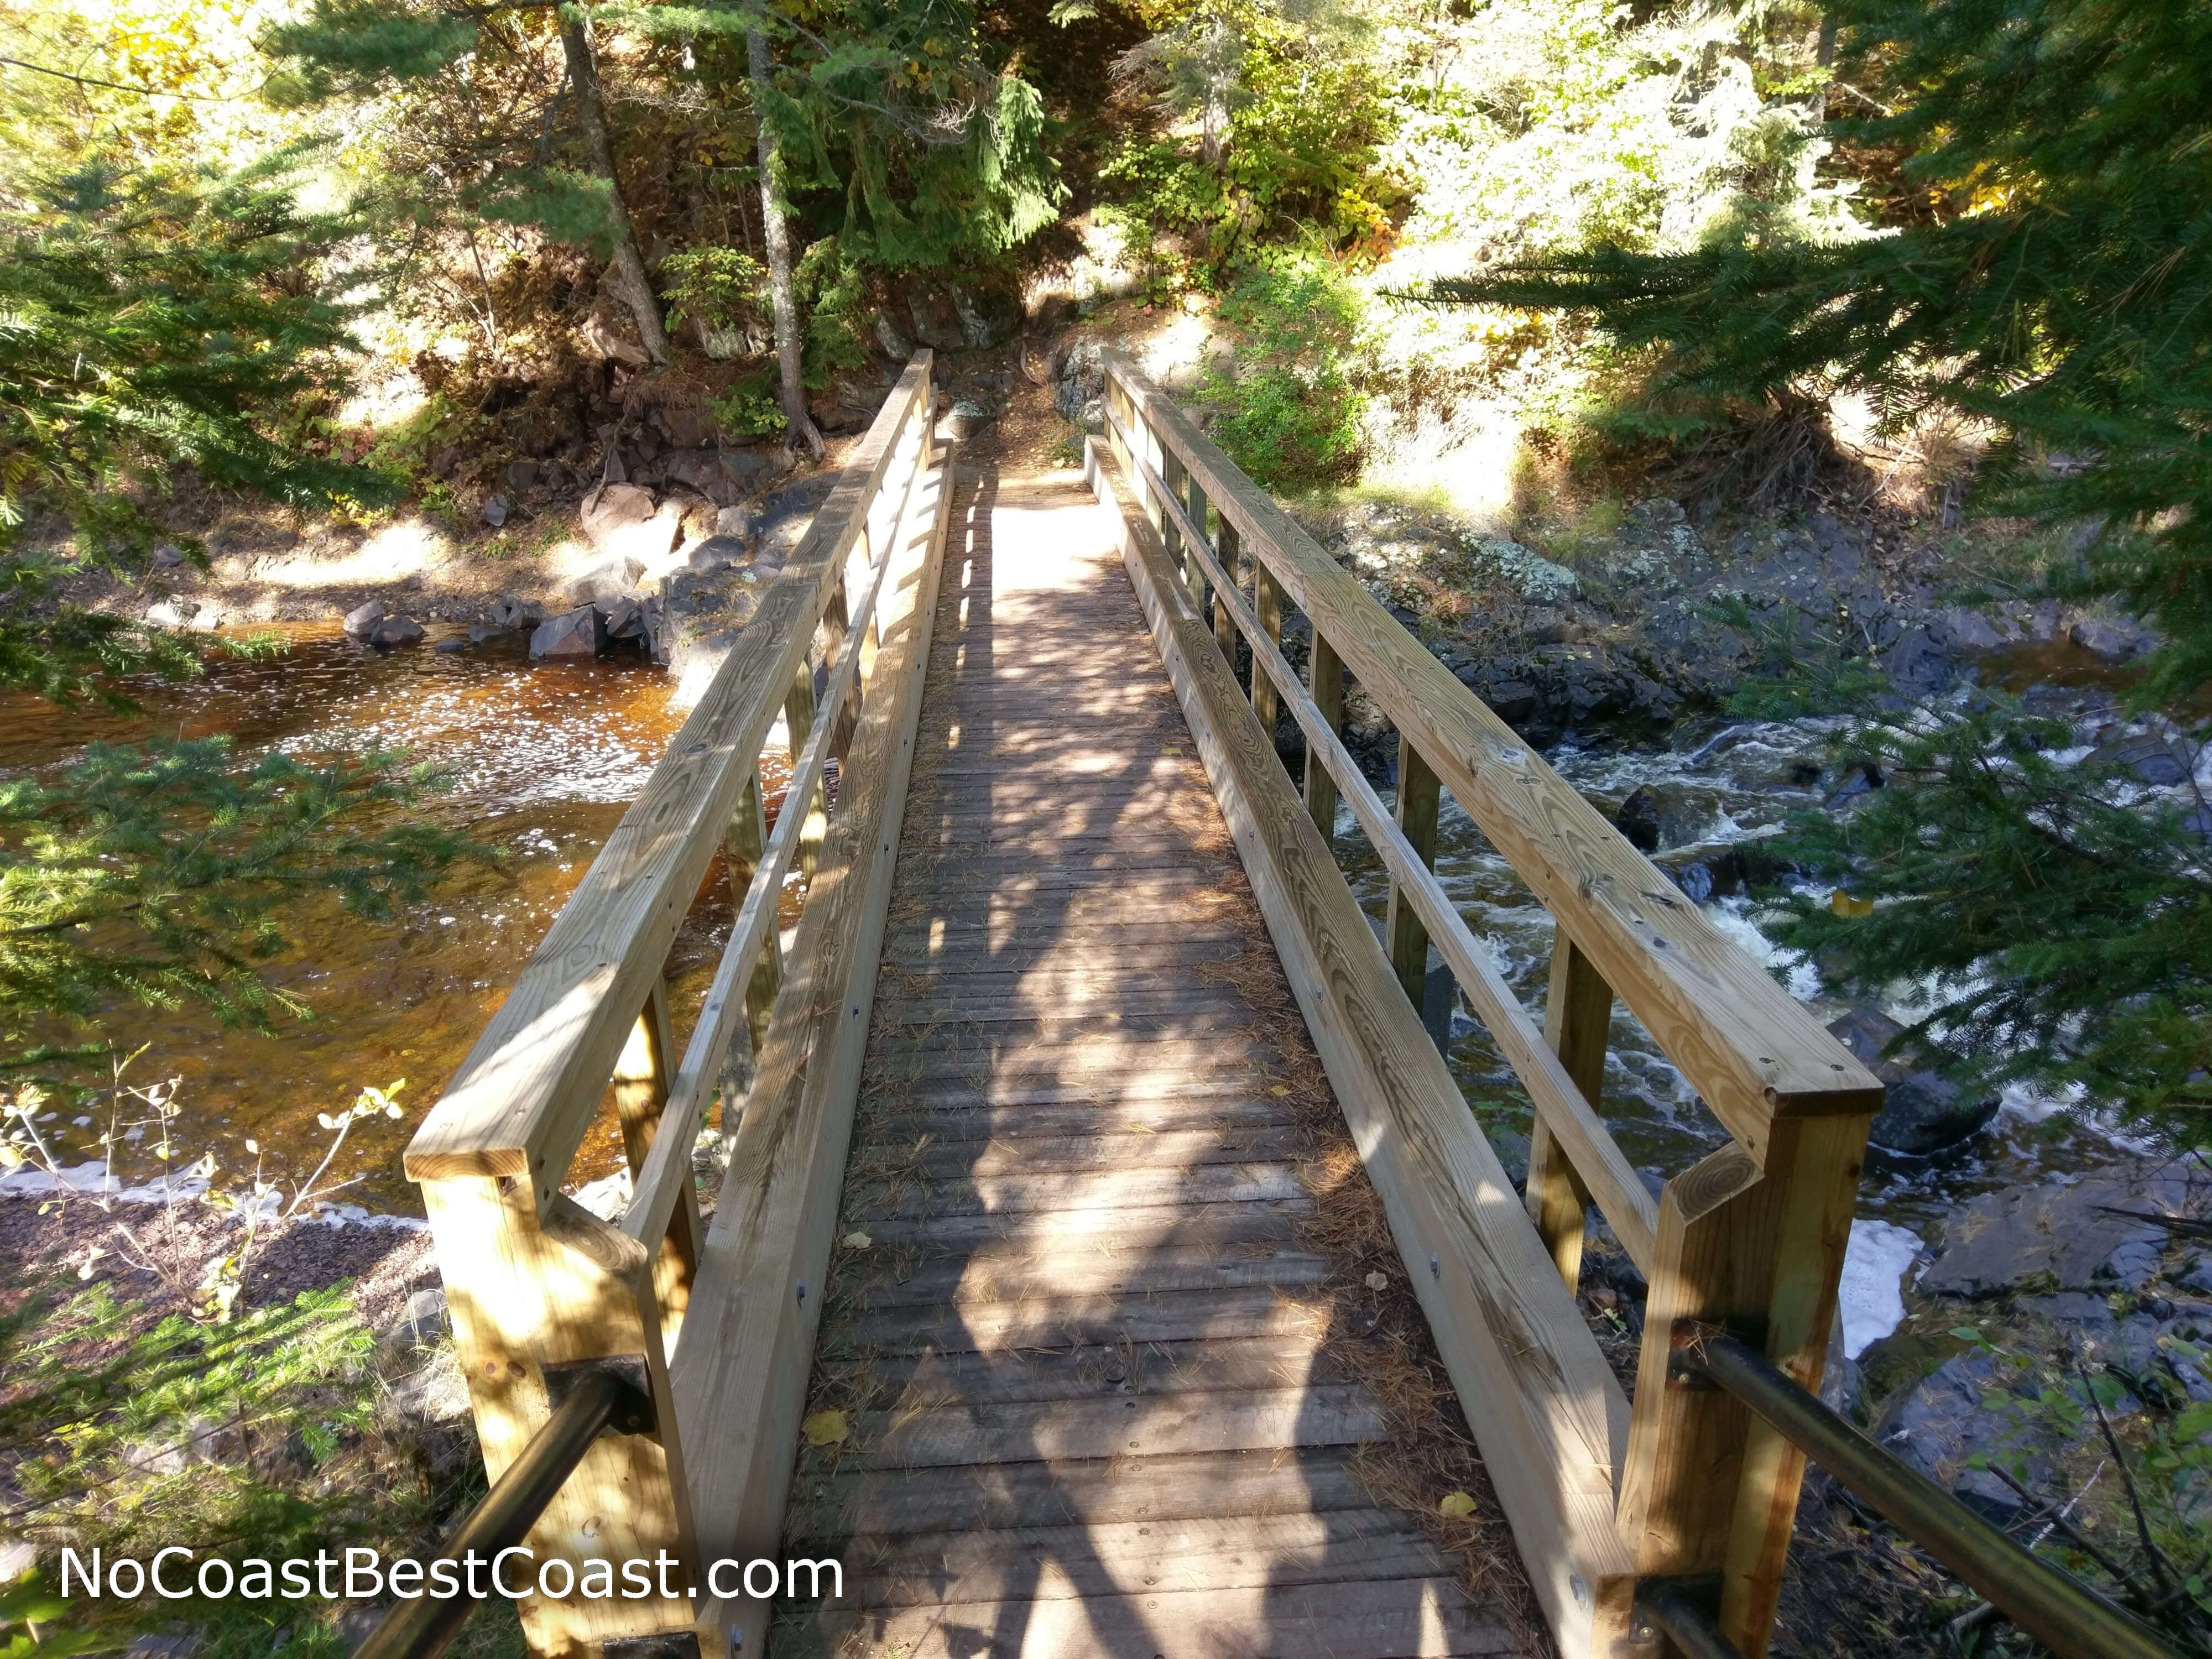 The wooden footbridge over the Lester River